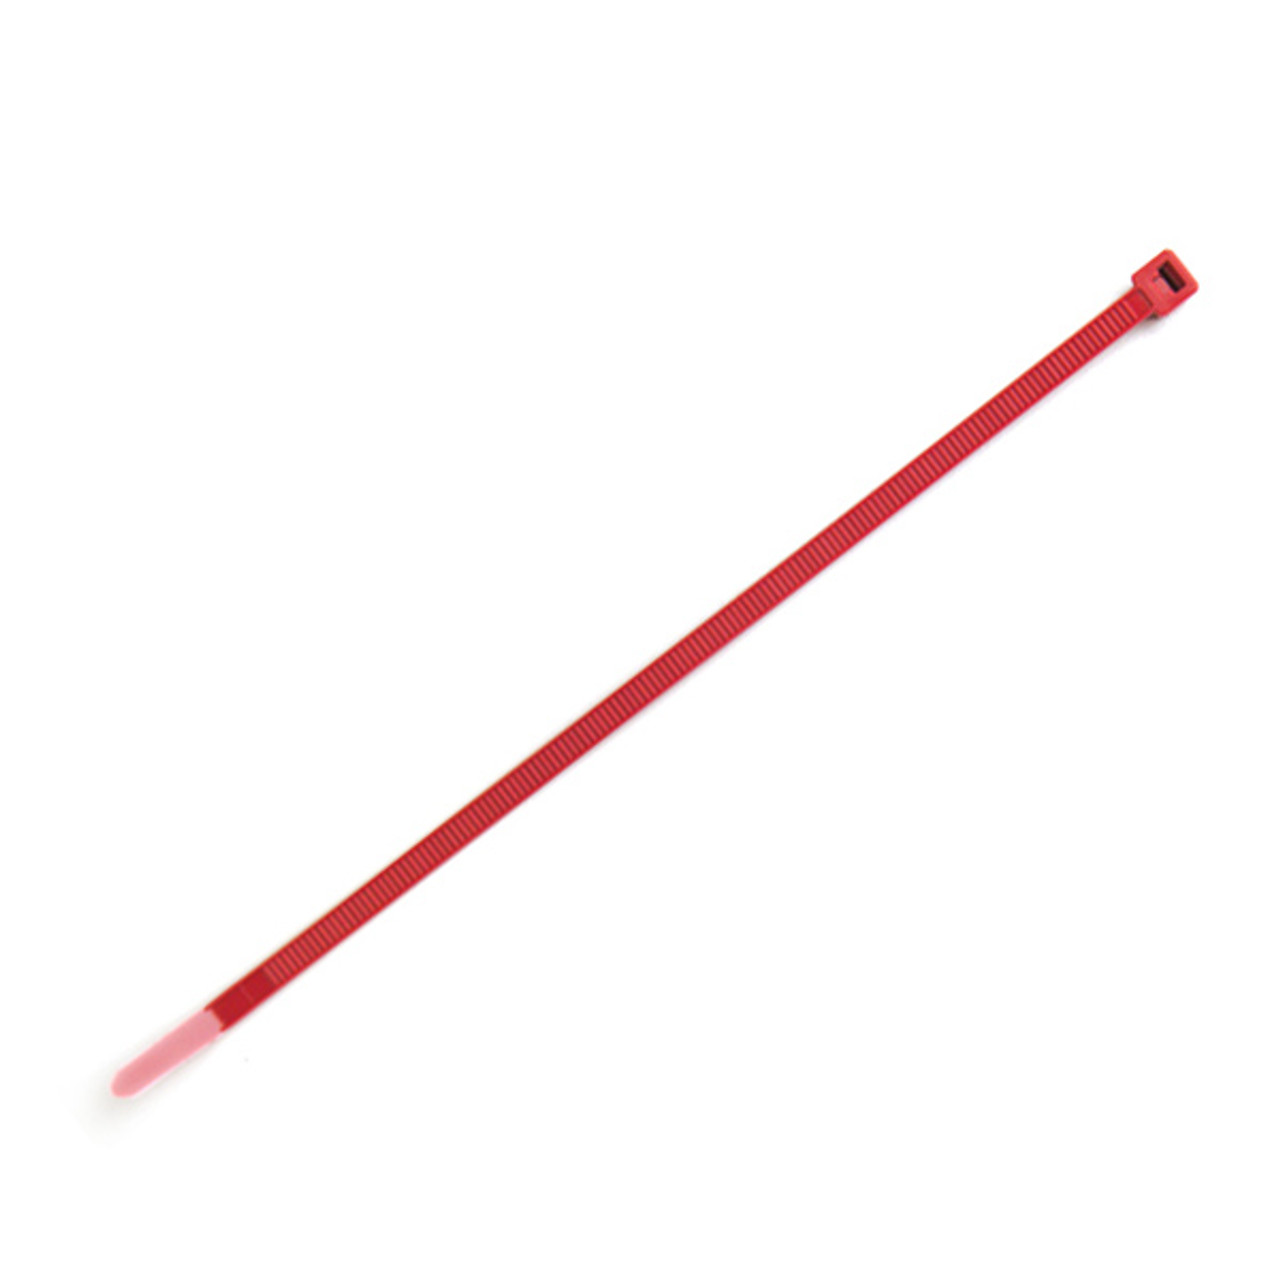 Wire Ties- 7.5" Length- Red- Pack of 25 (Grote 85-6030)